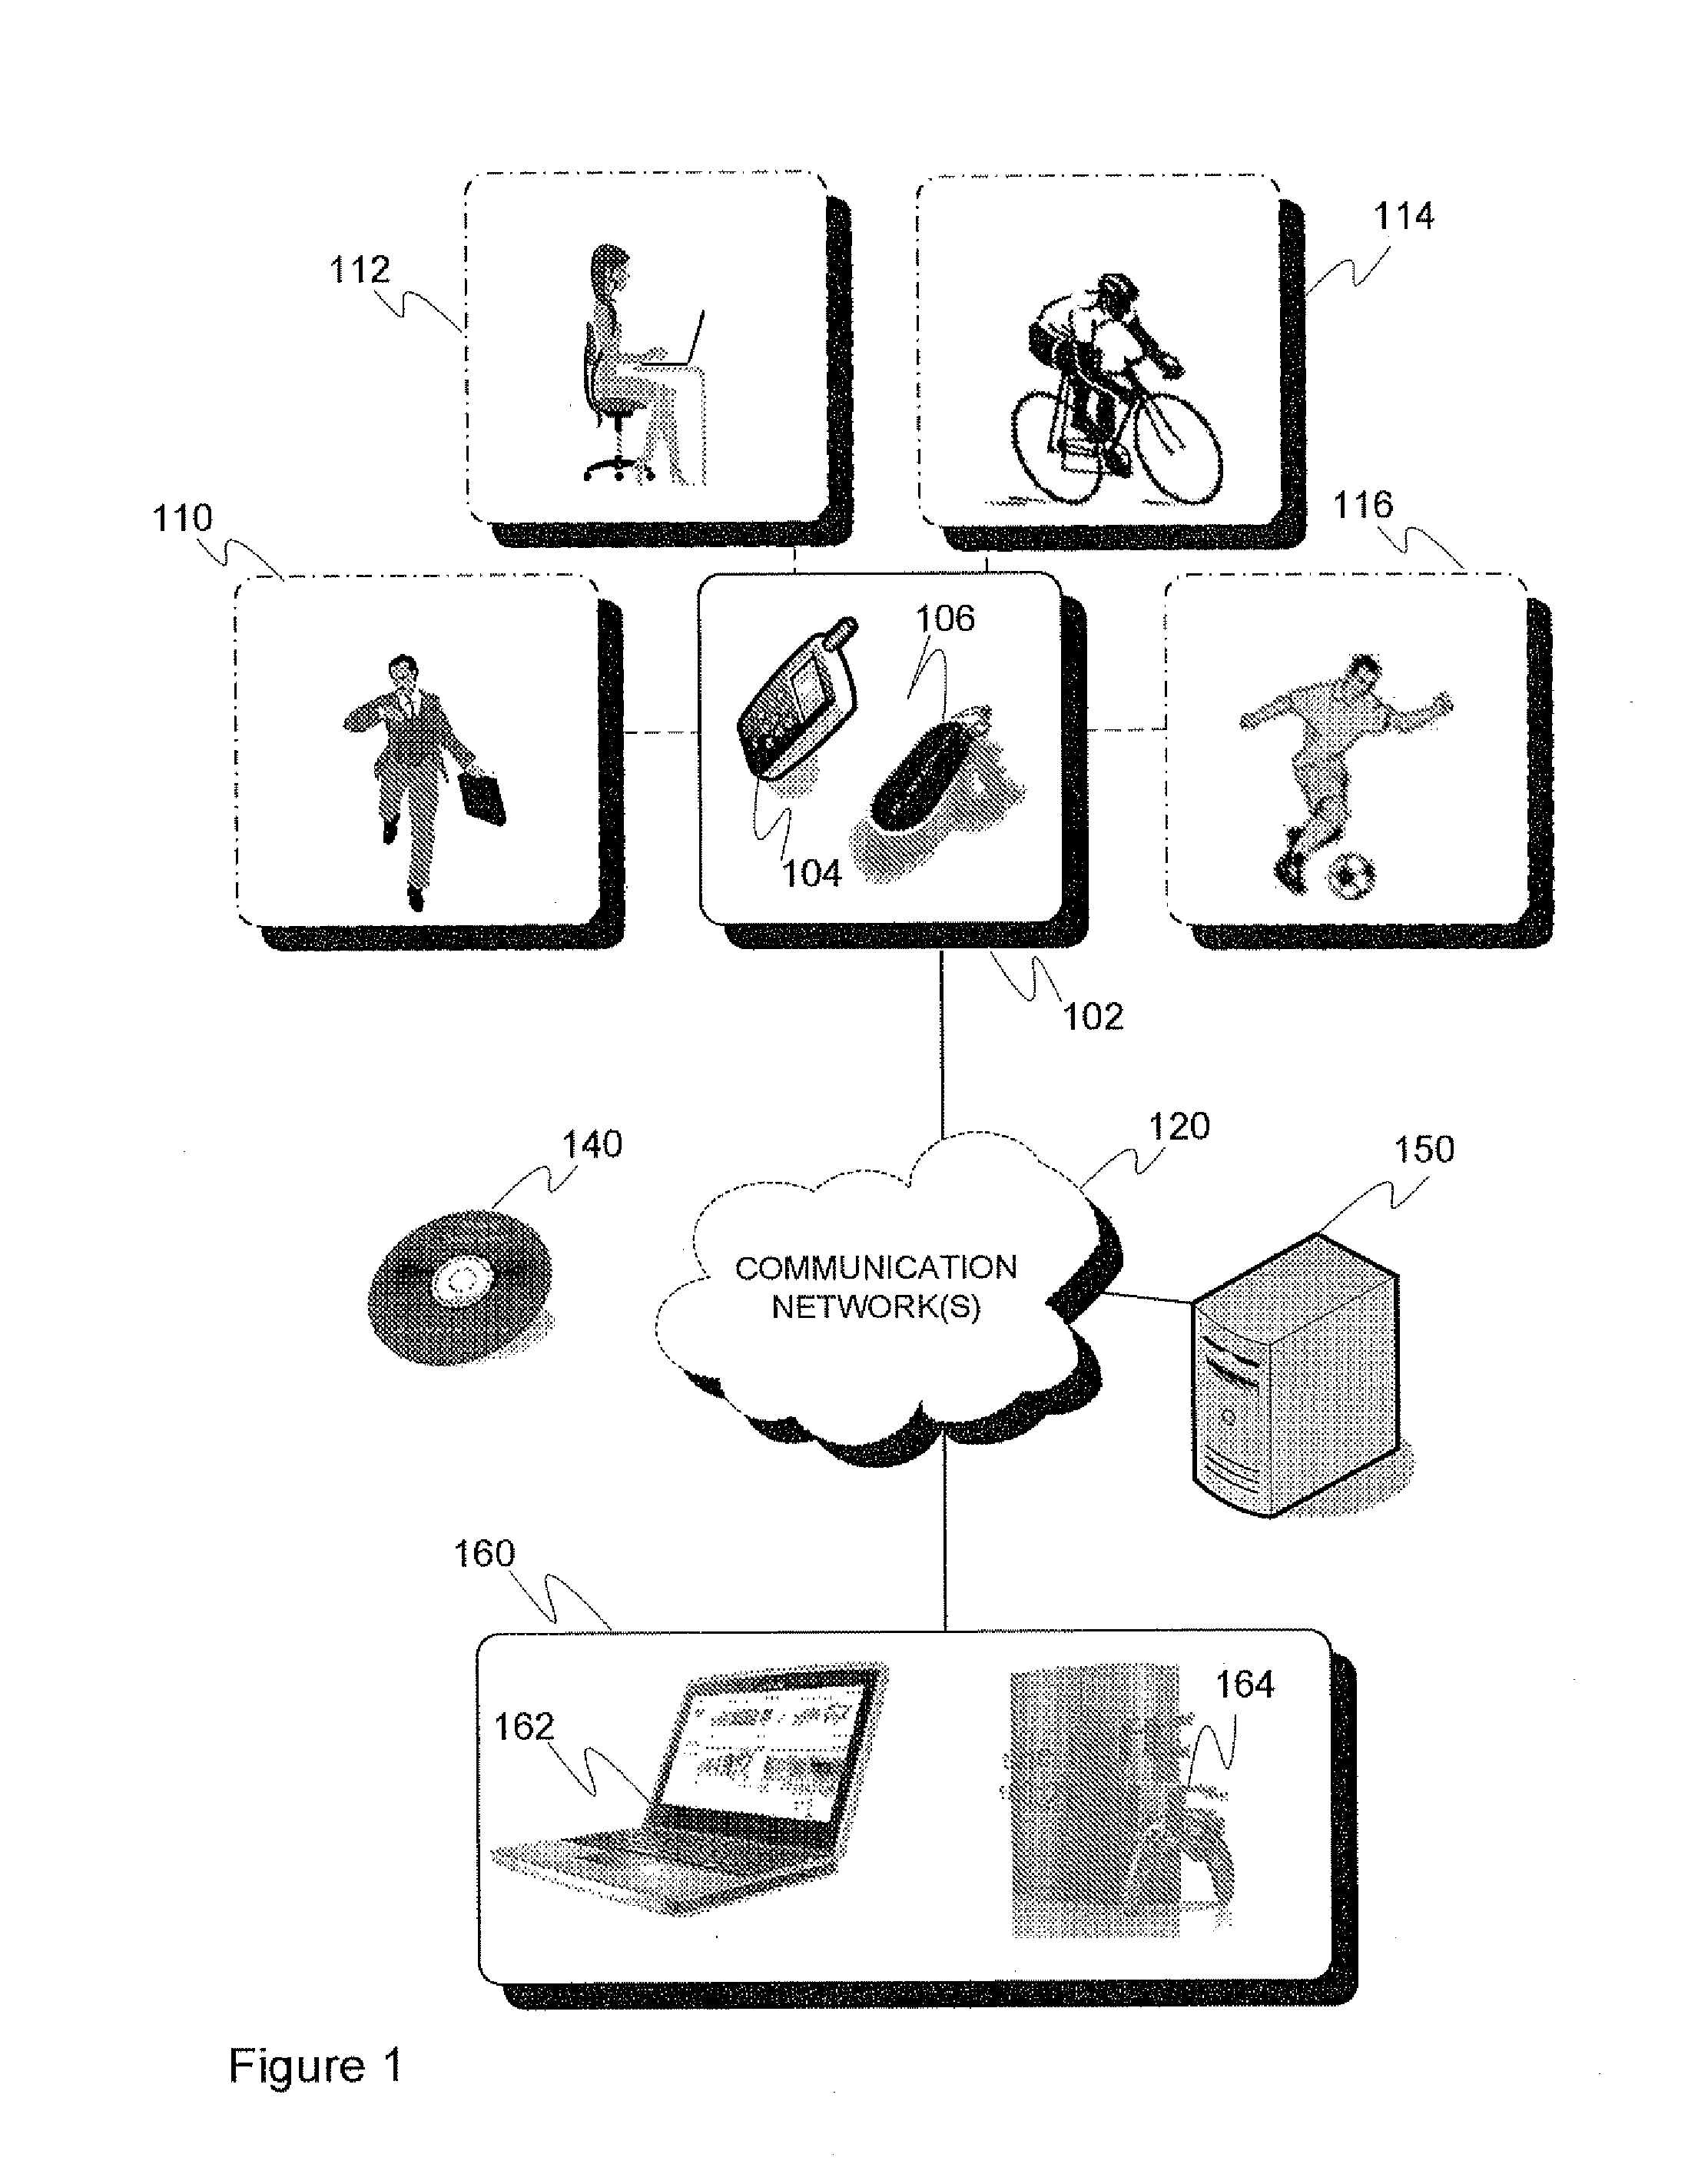 Physical activity-based device control